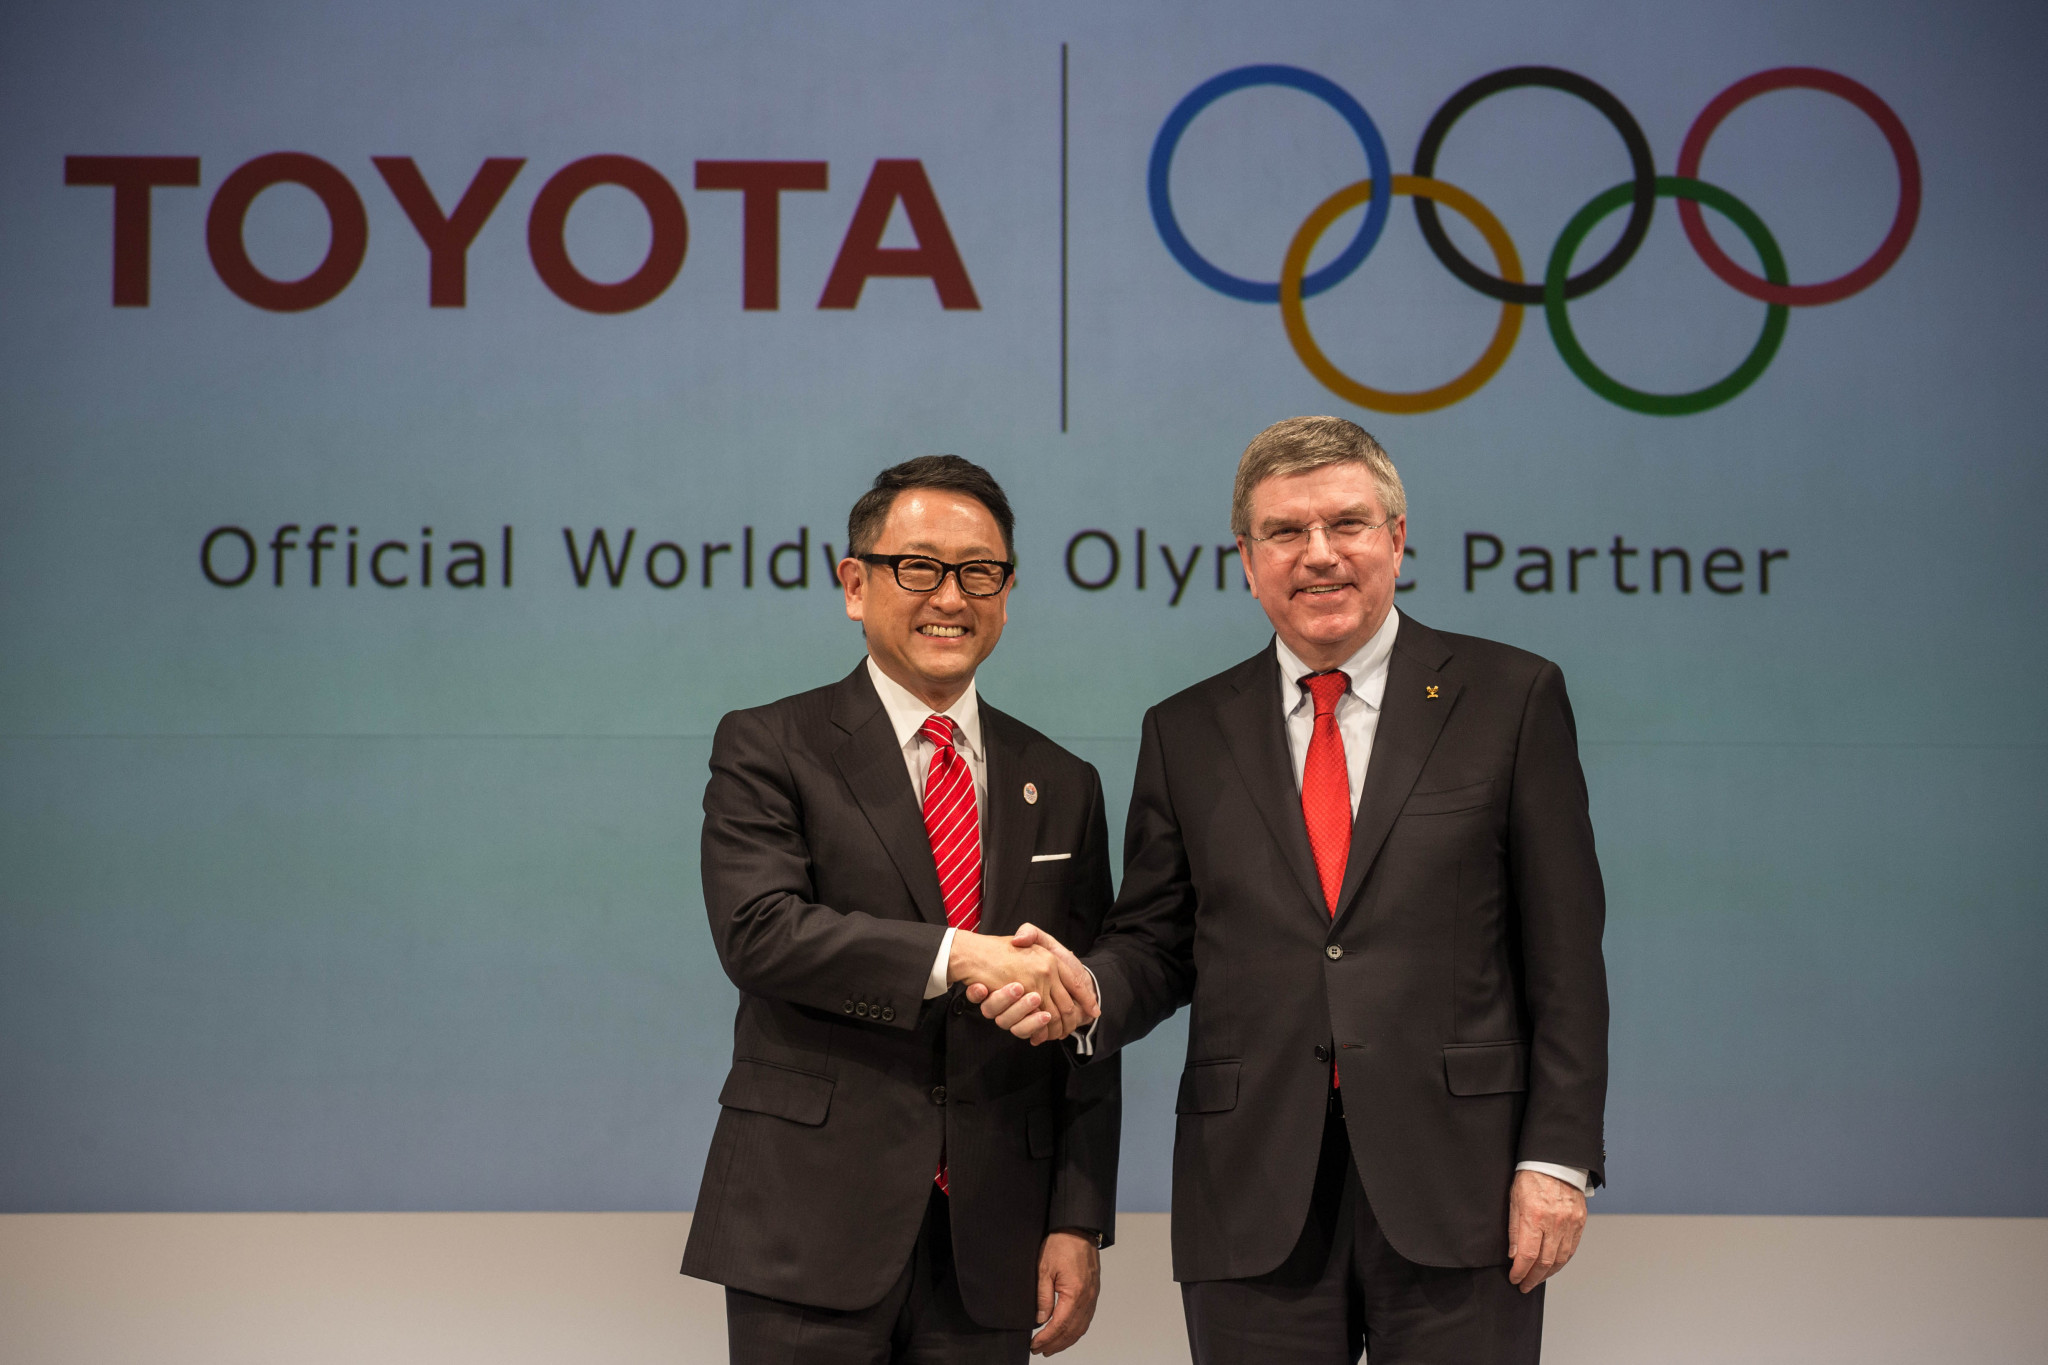 Toyota became a TOP sponsor in 2015 ©Getty Images